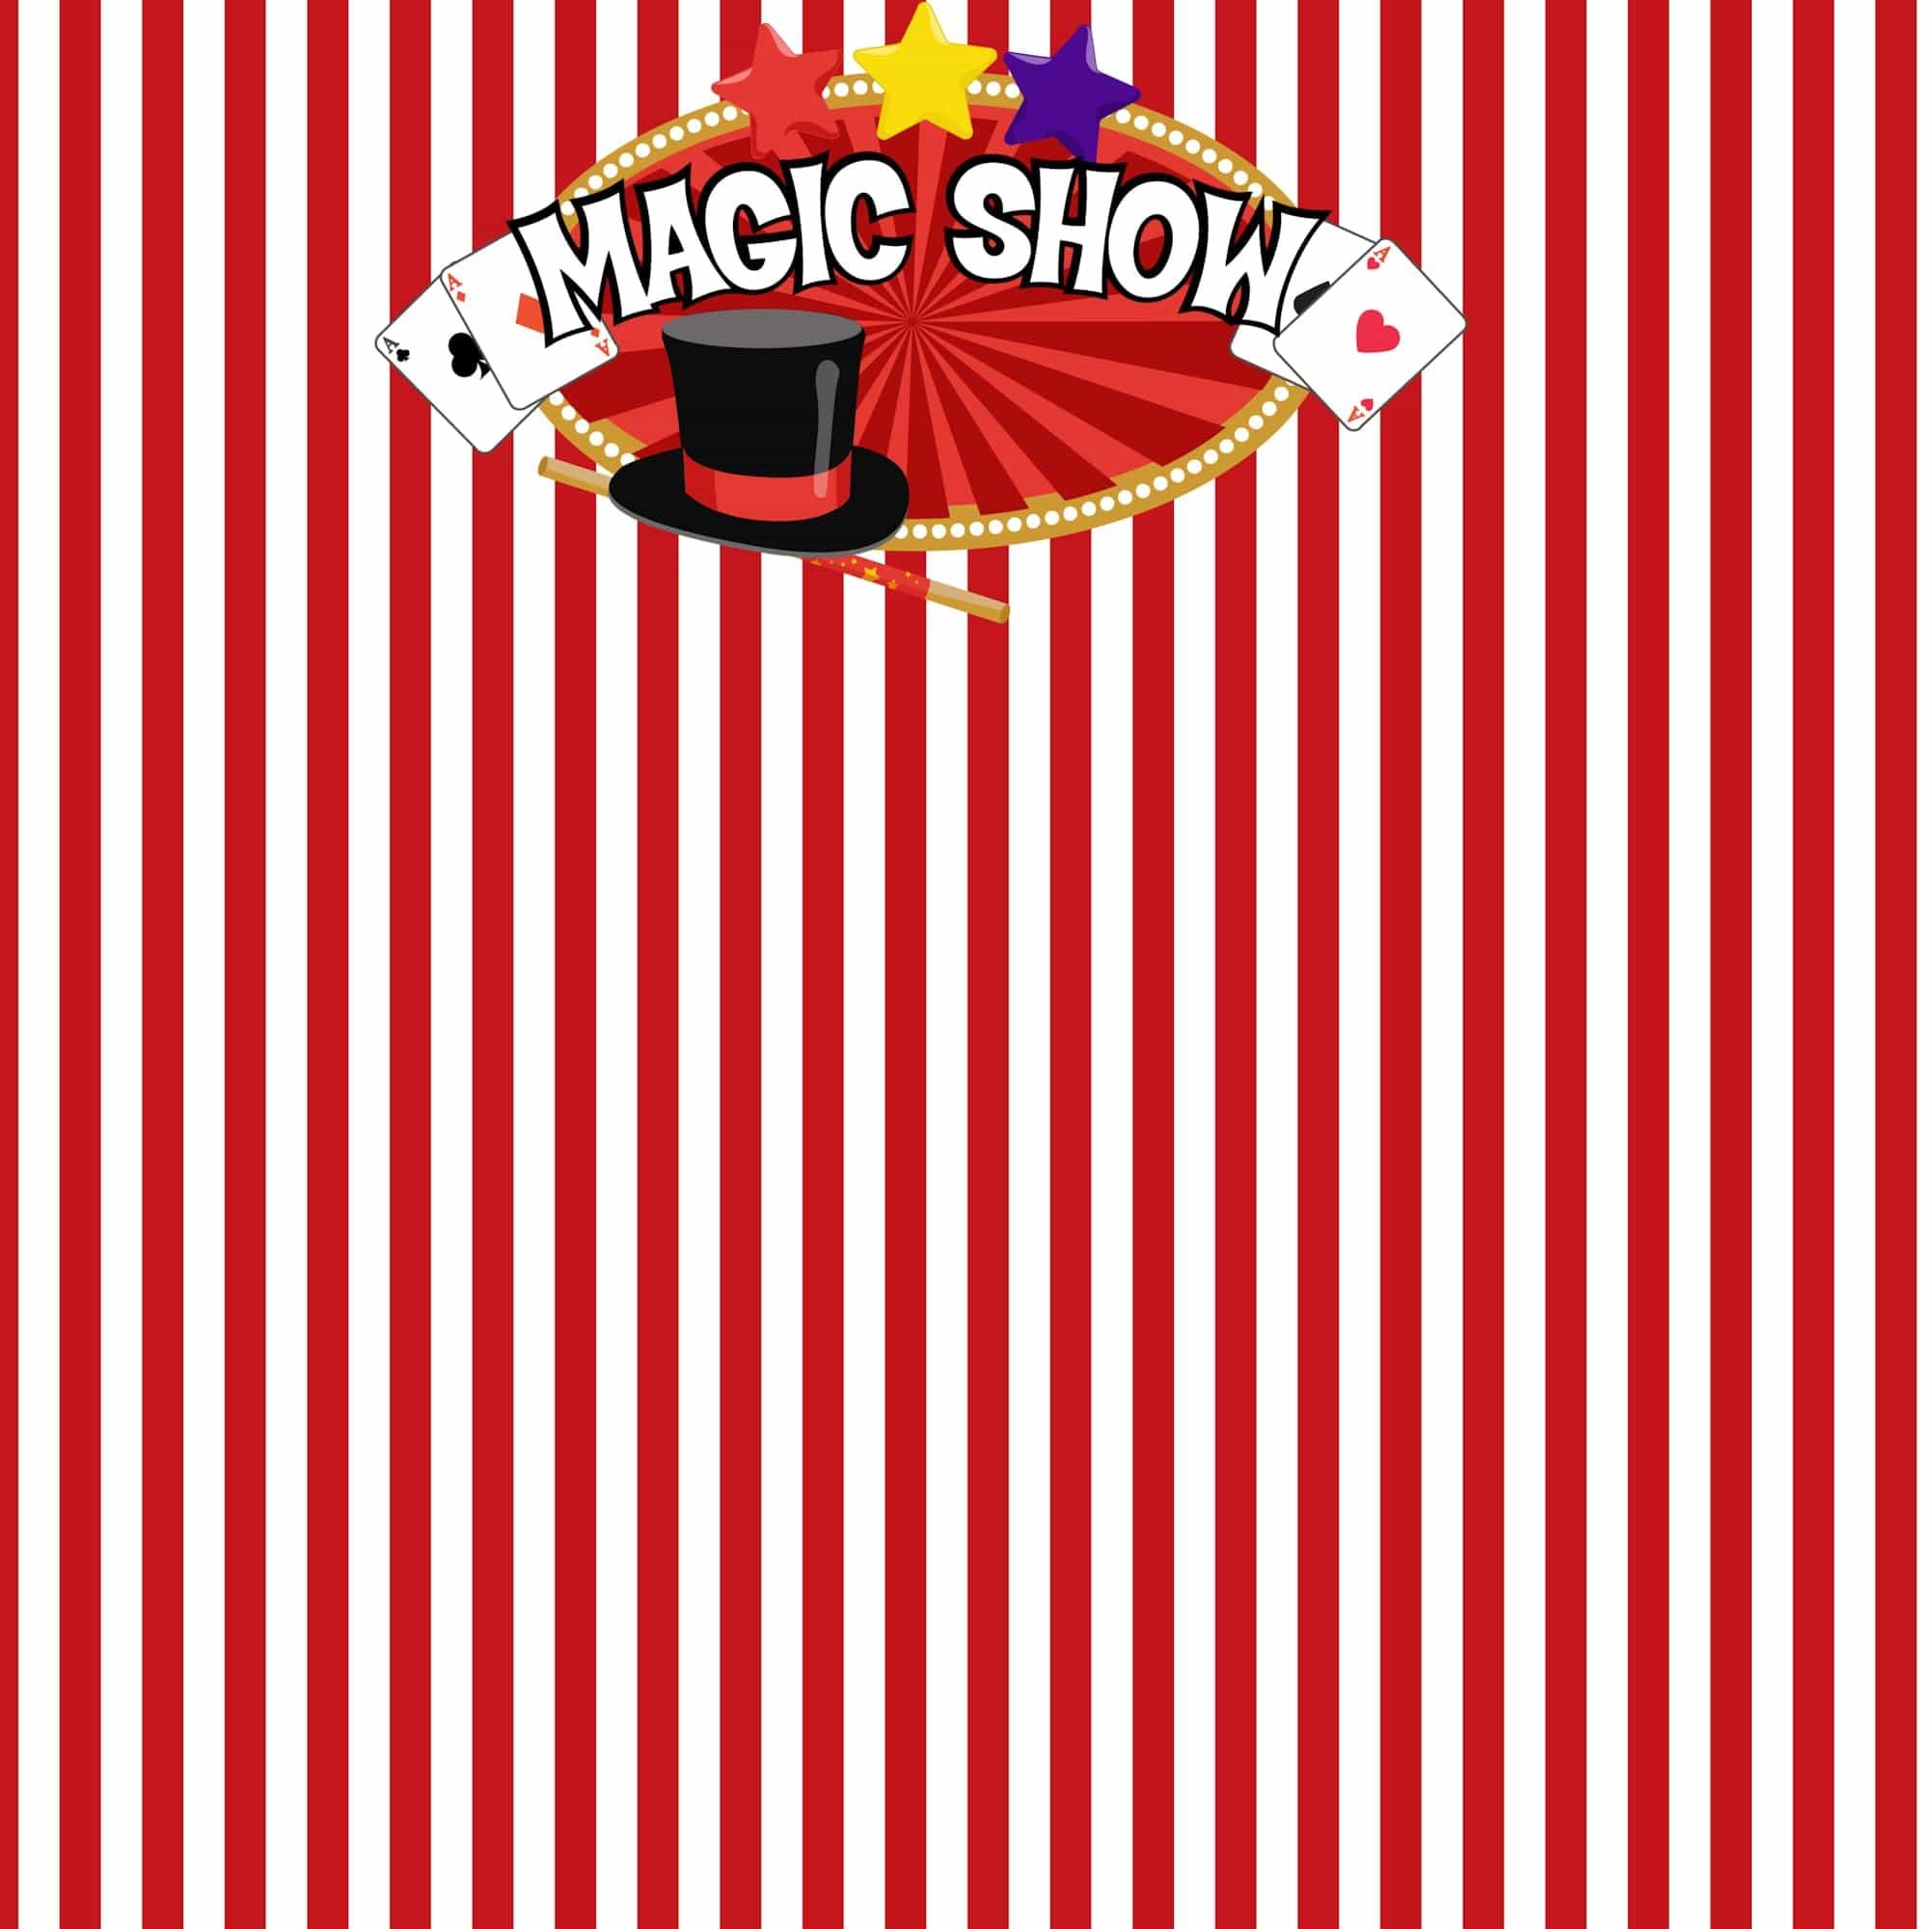 Just Fun Collection Magic Show 12 x 12 Double-Sided Scrapbook Paper by SSC Designs - Scrapbook Supply Companies